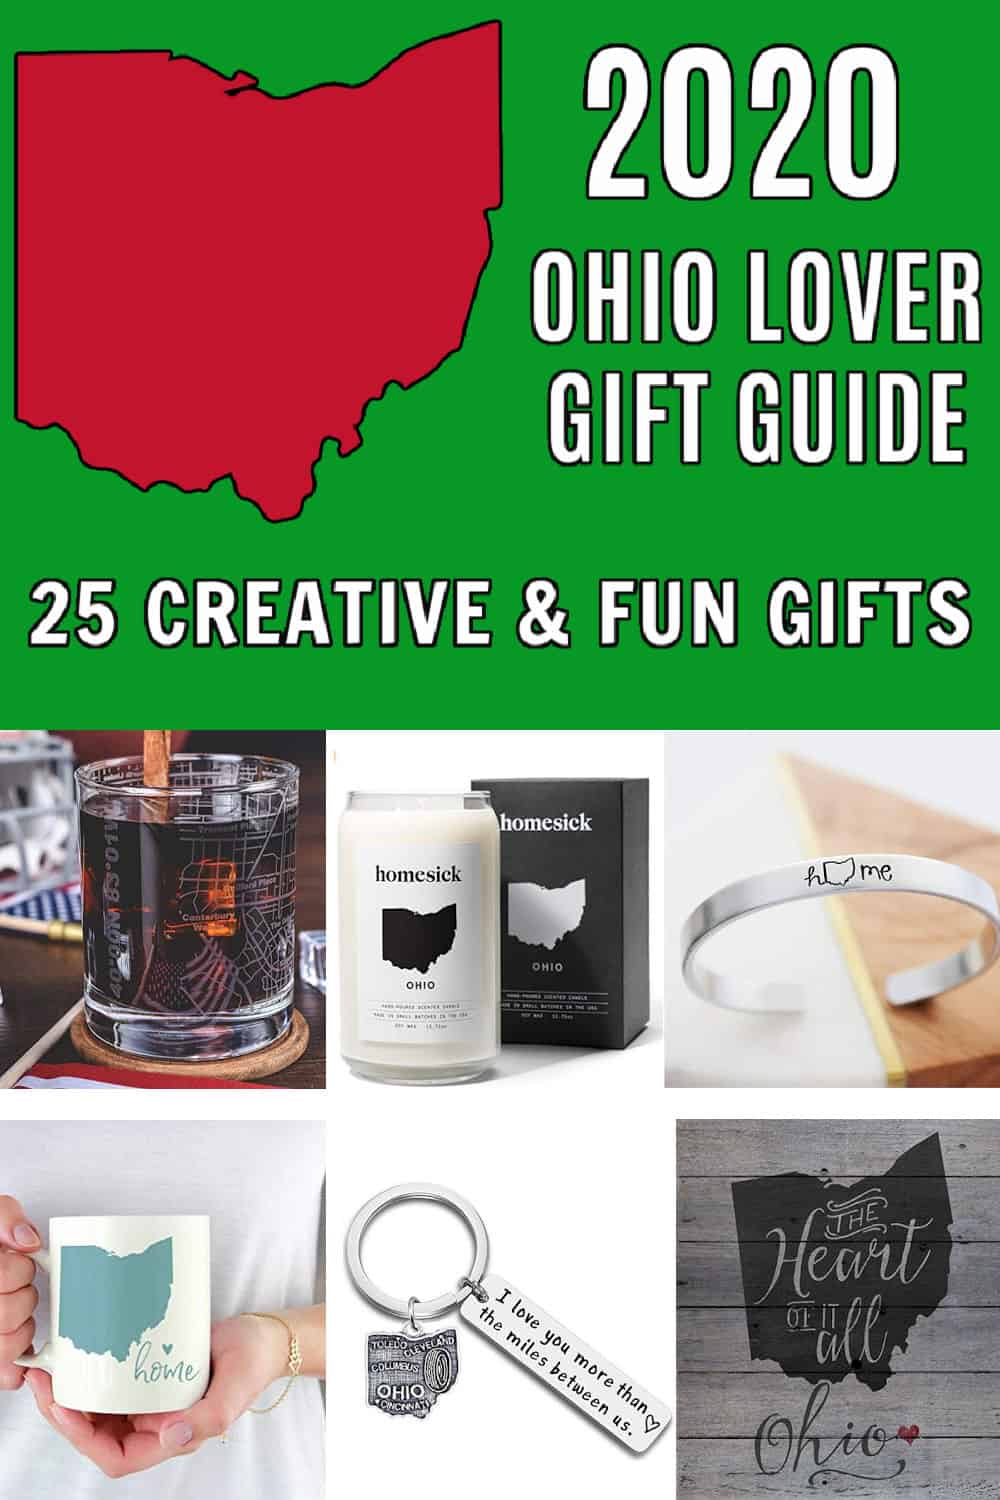 Looking for gifts for the Ohio lover in your life? From vintage prints to must-read books, here are 25 fun and creative Ohio gifts for the 2019 holiday season! #Ohio #OhioGifts #OhioHolidays #OhioGiftGuide